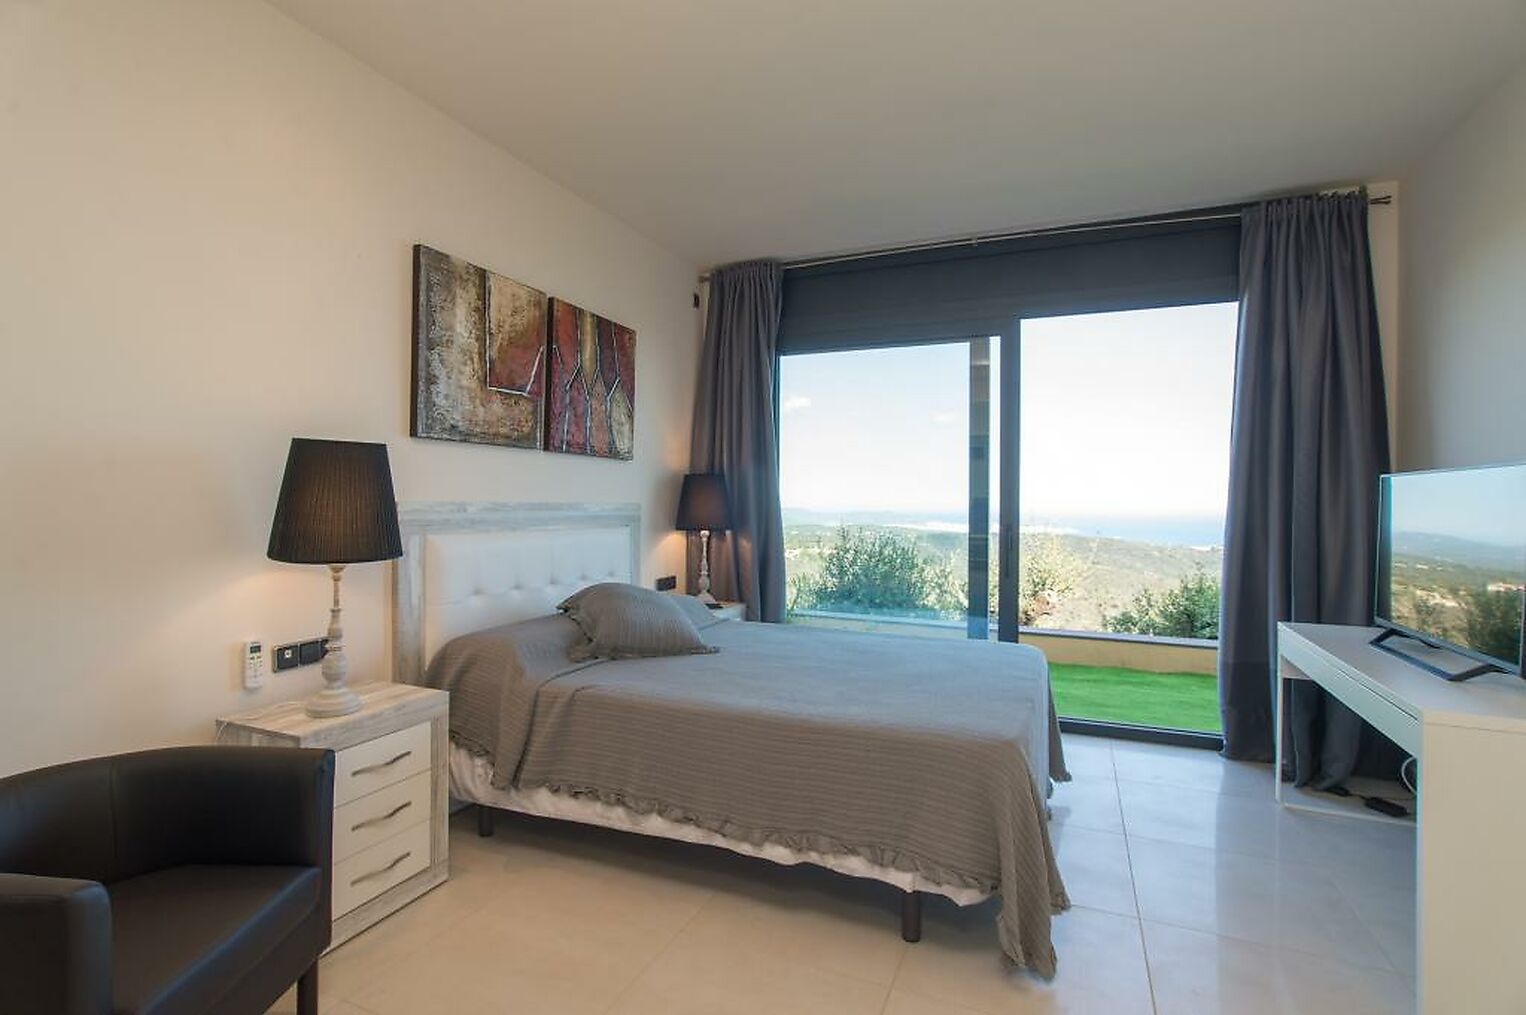 Large detached villa with stunning sea views. Located in the quiet, upmarket area of Mas Nou, close to all services in Playa d´Aro, and the nearby Mas